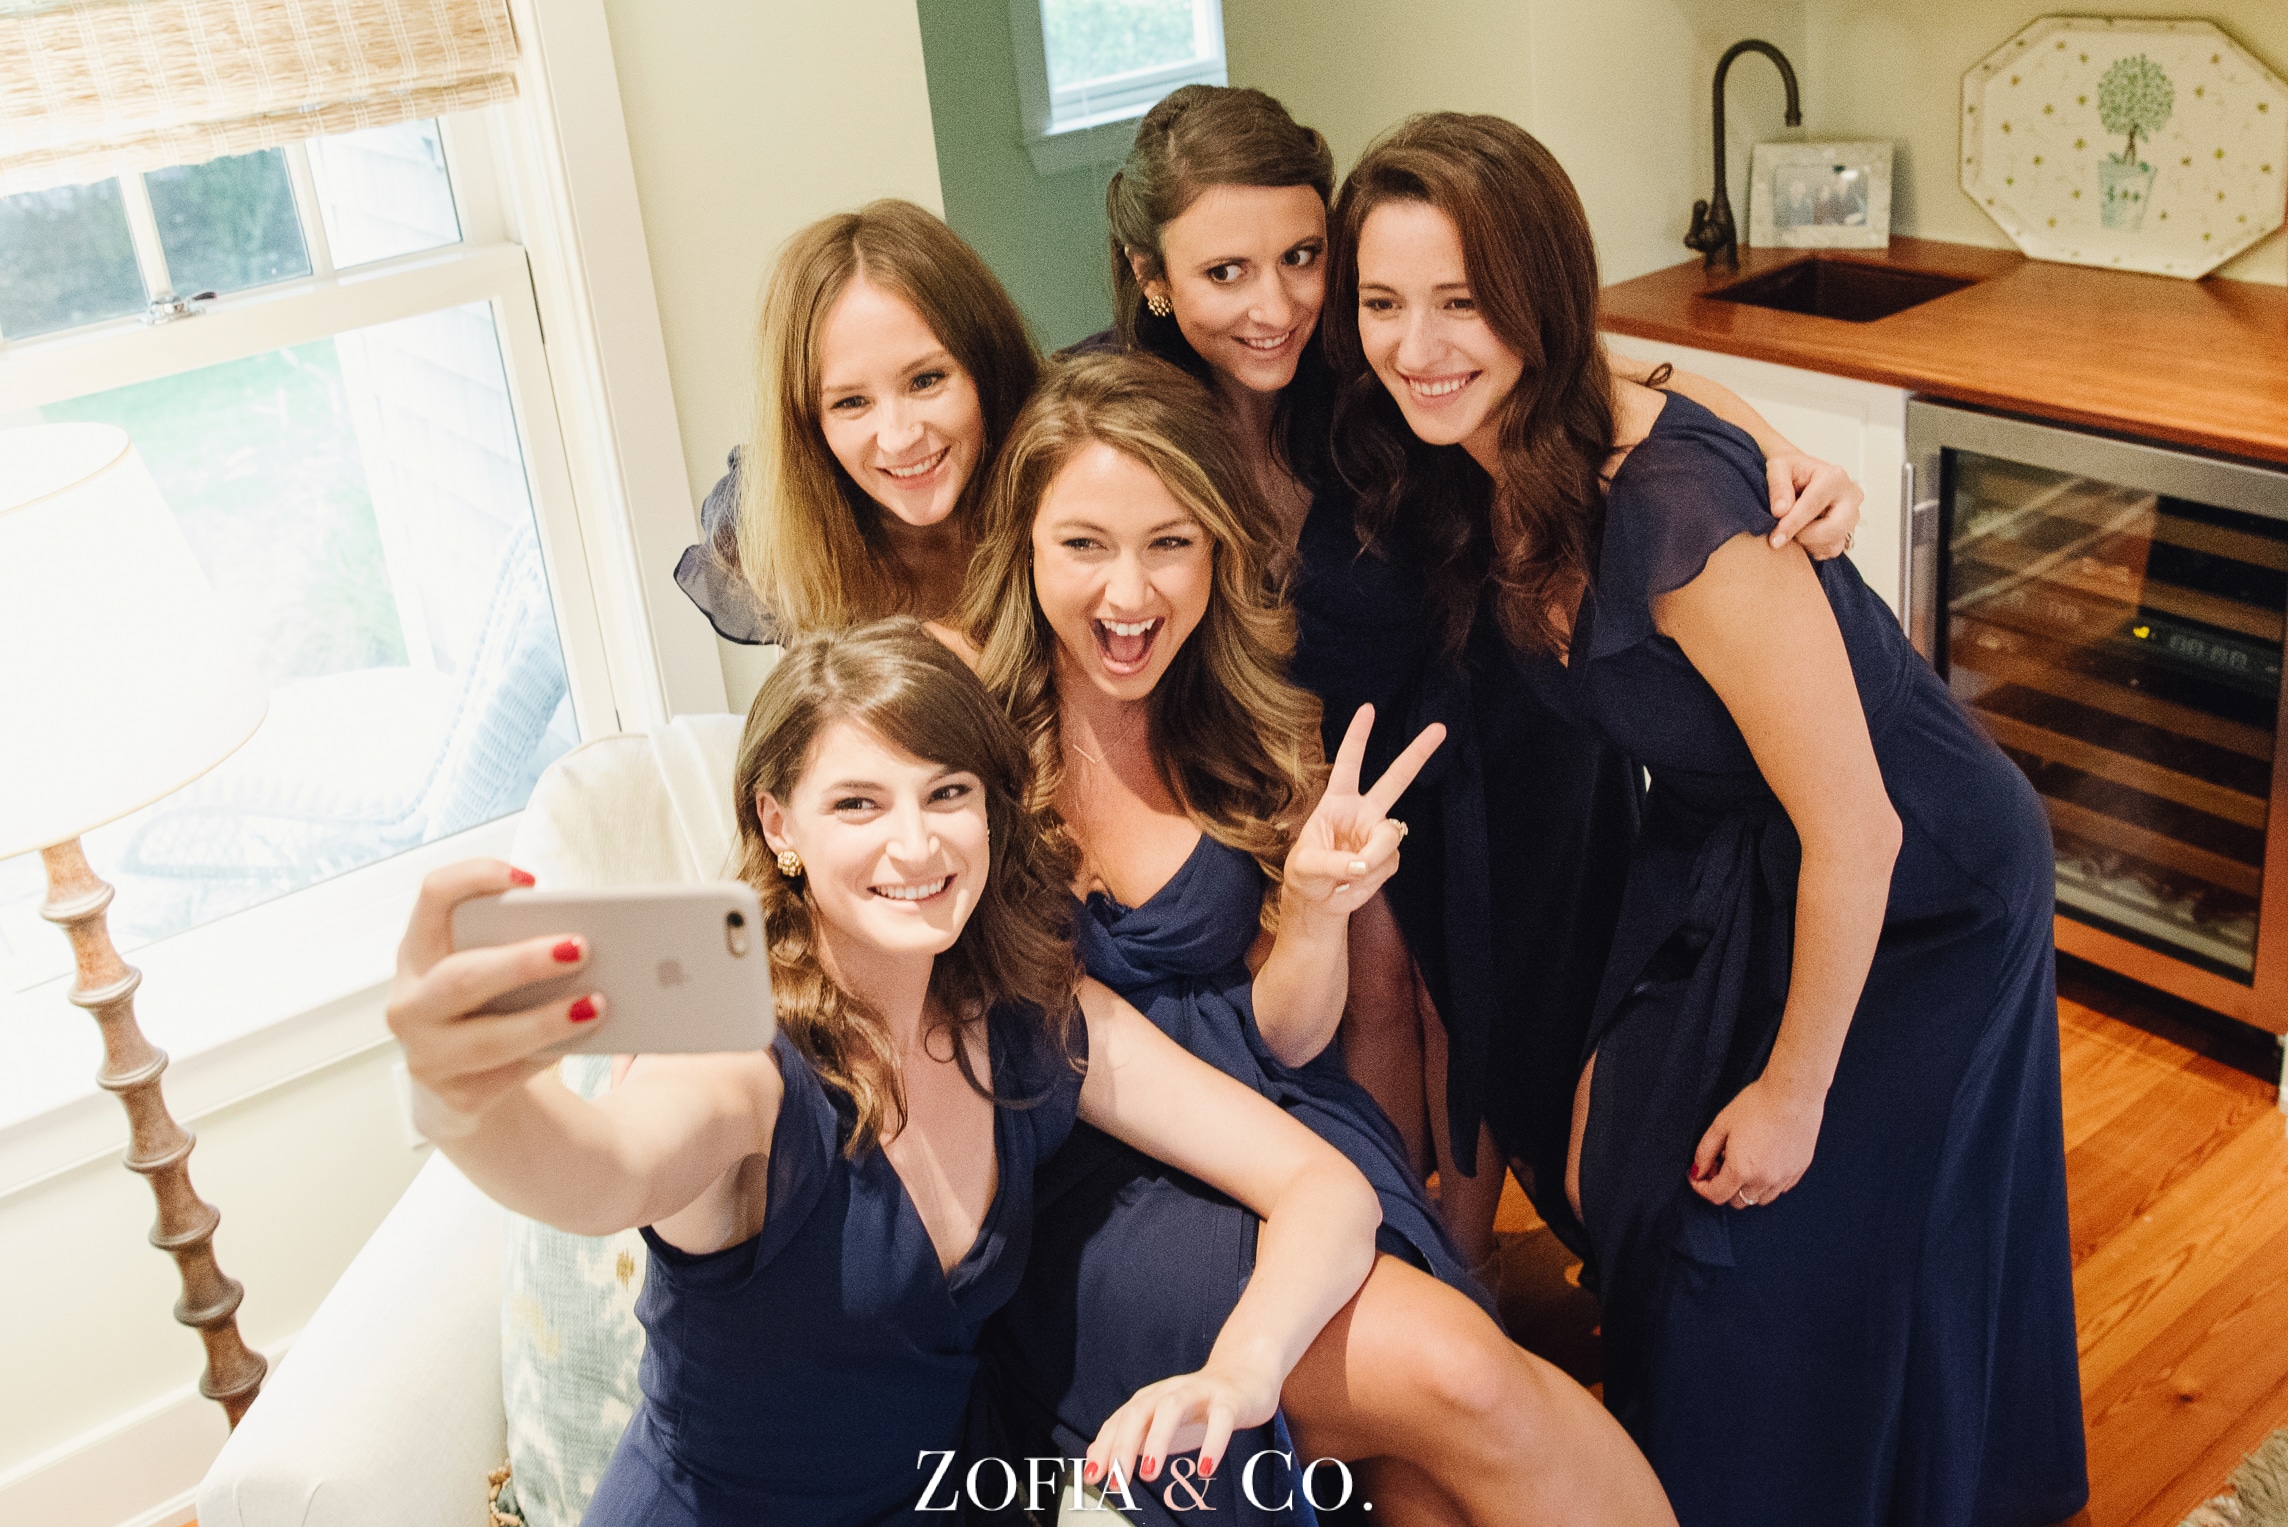 Nantucket wedding at Sconset Chapel and Sankaty Head Golf Club by Zofia and Co.